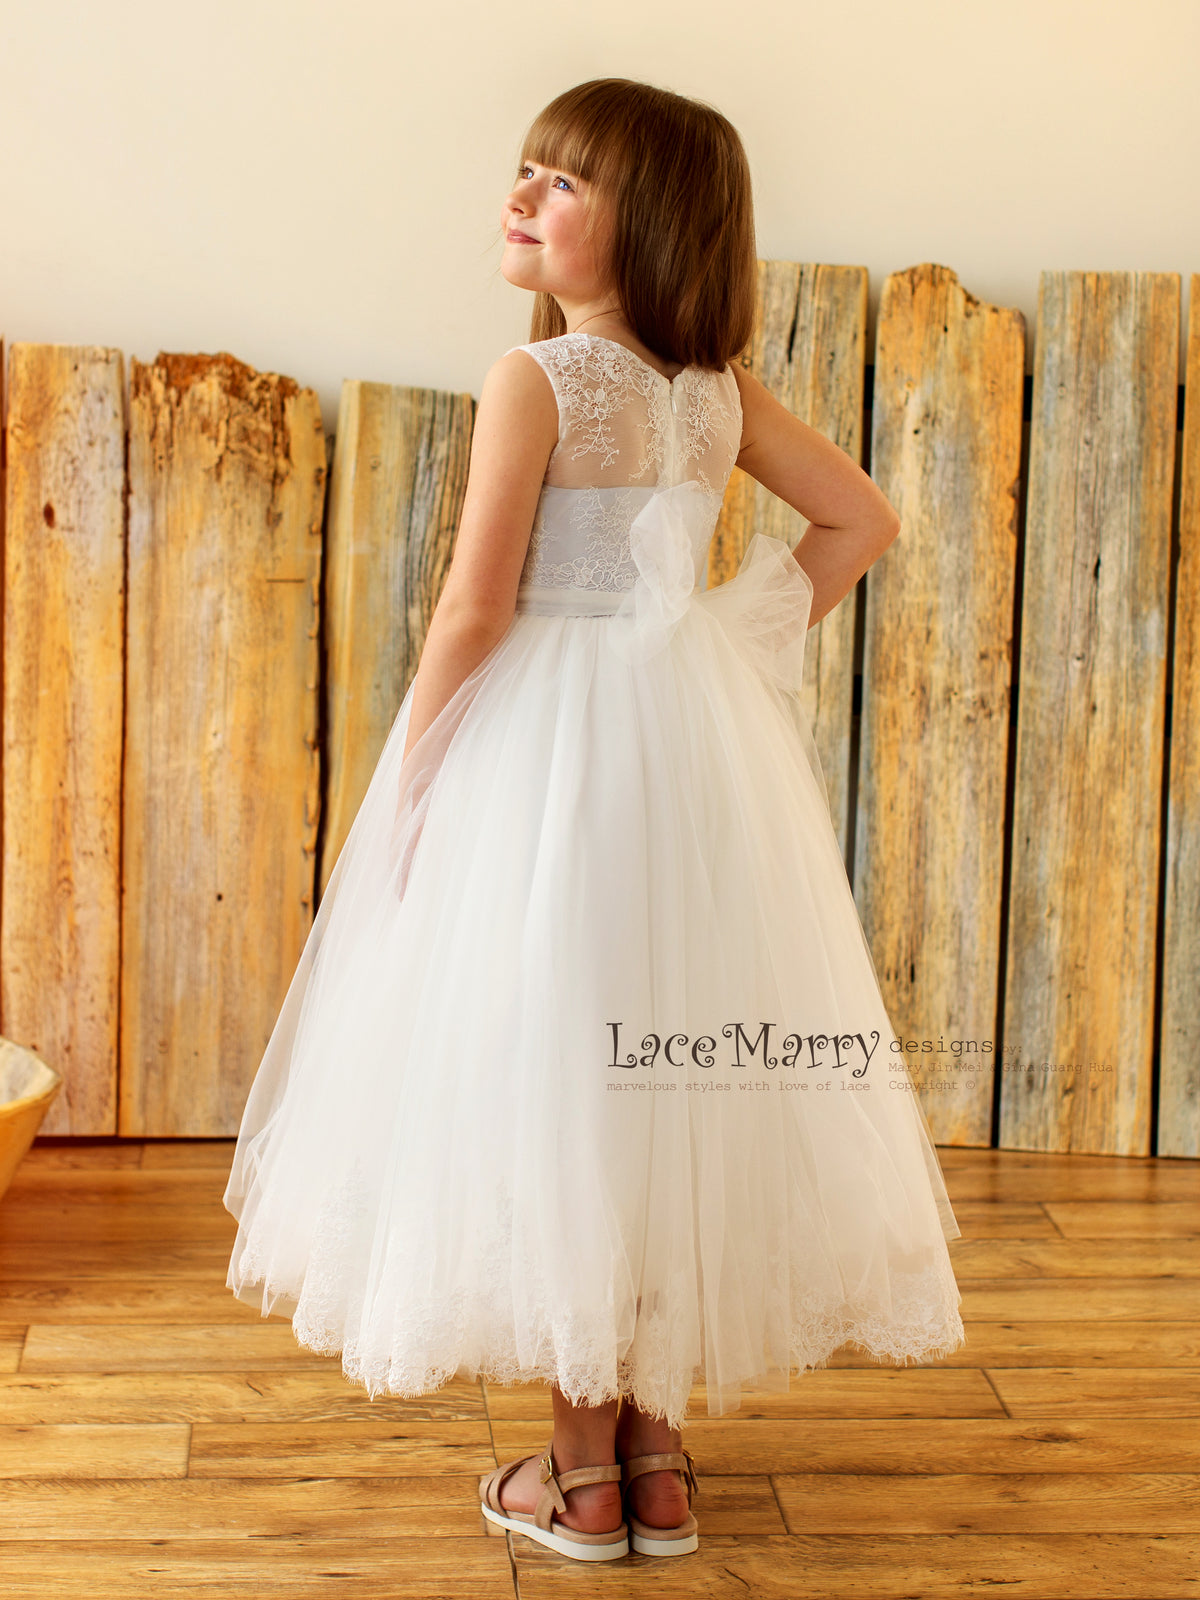 Tutu Skirt Flower Girl Dress with Lace Top